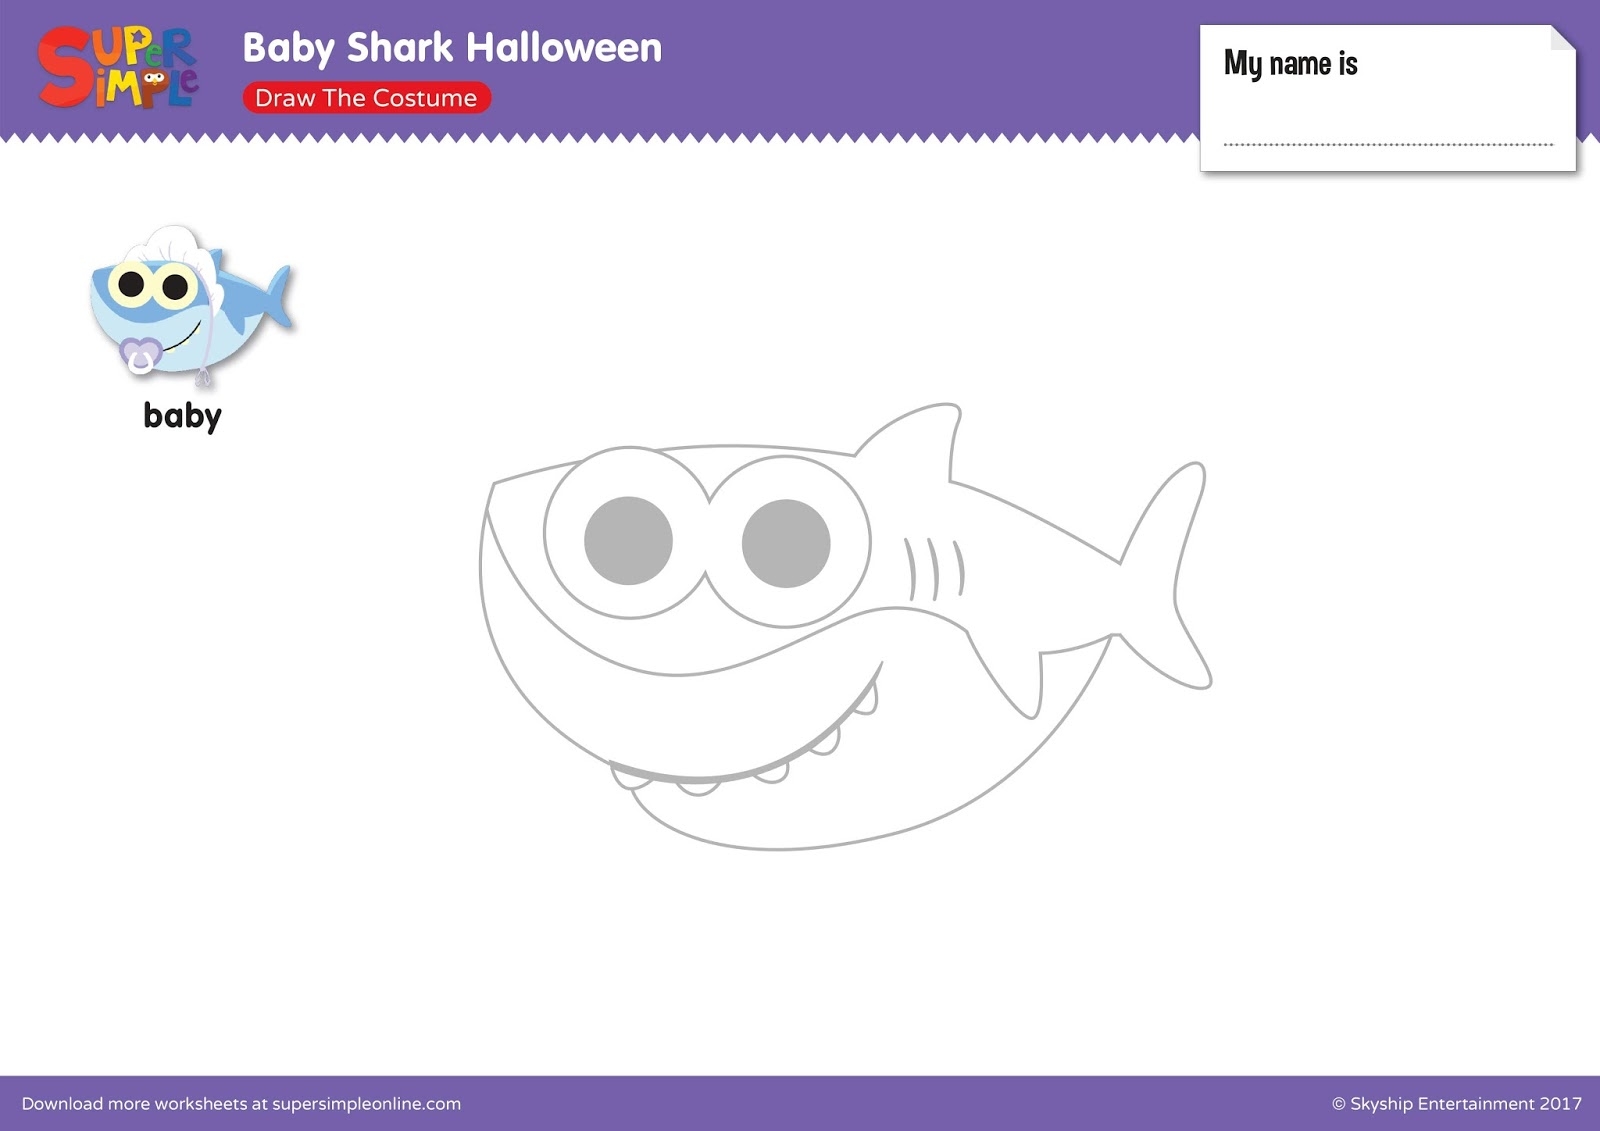 Baby shark simple song